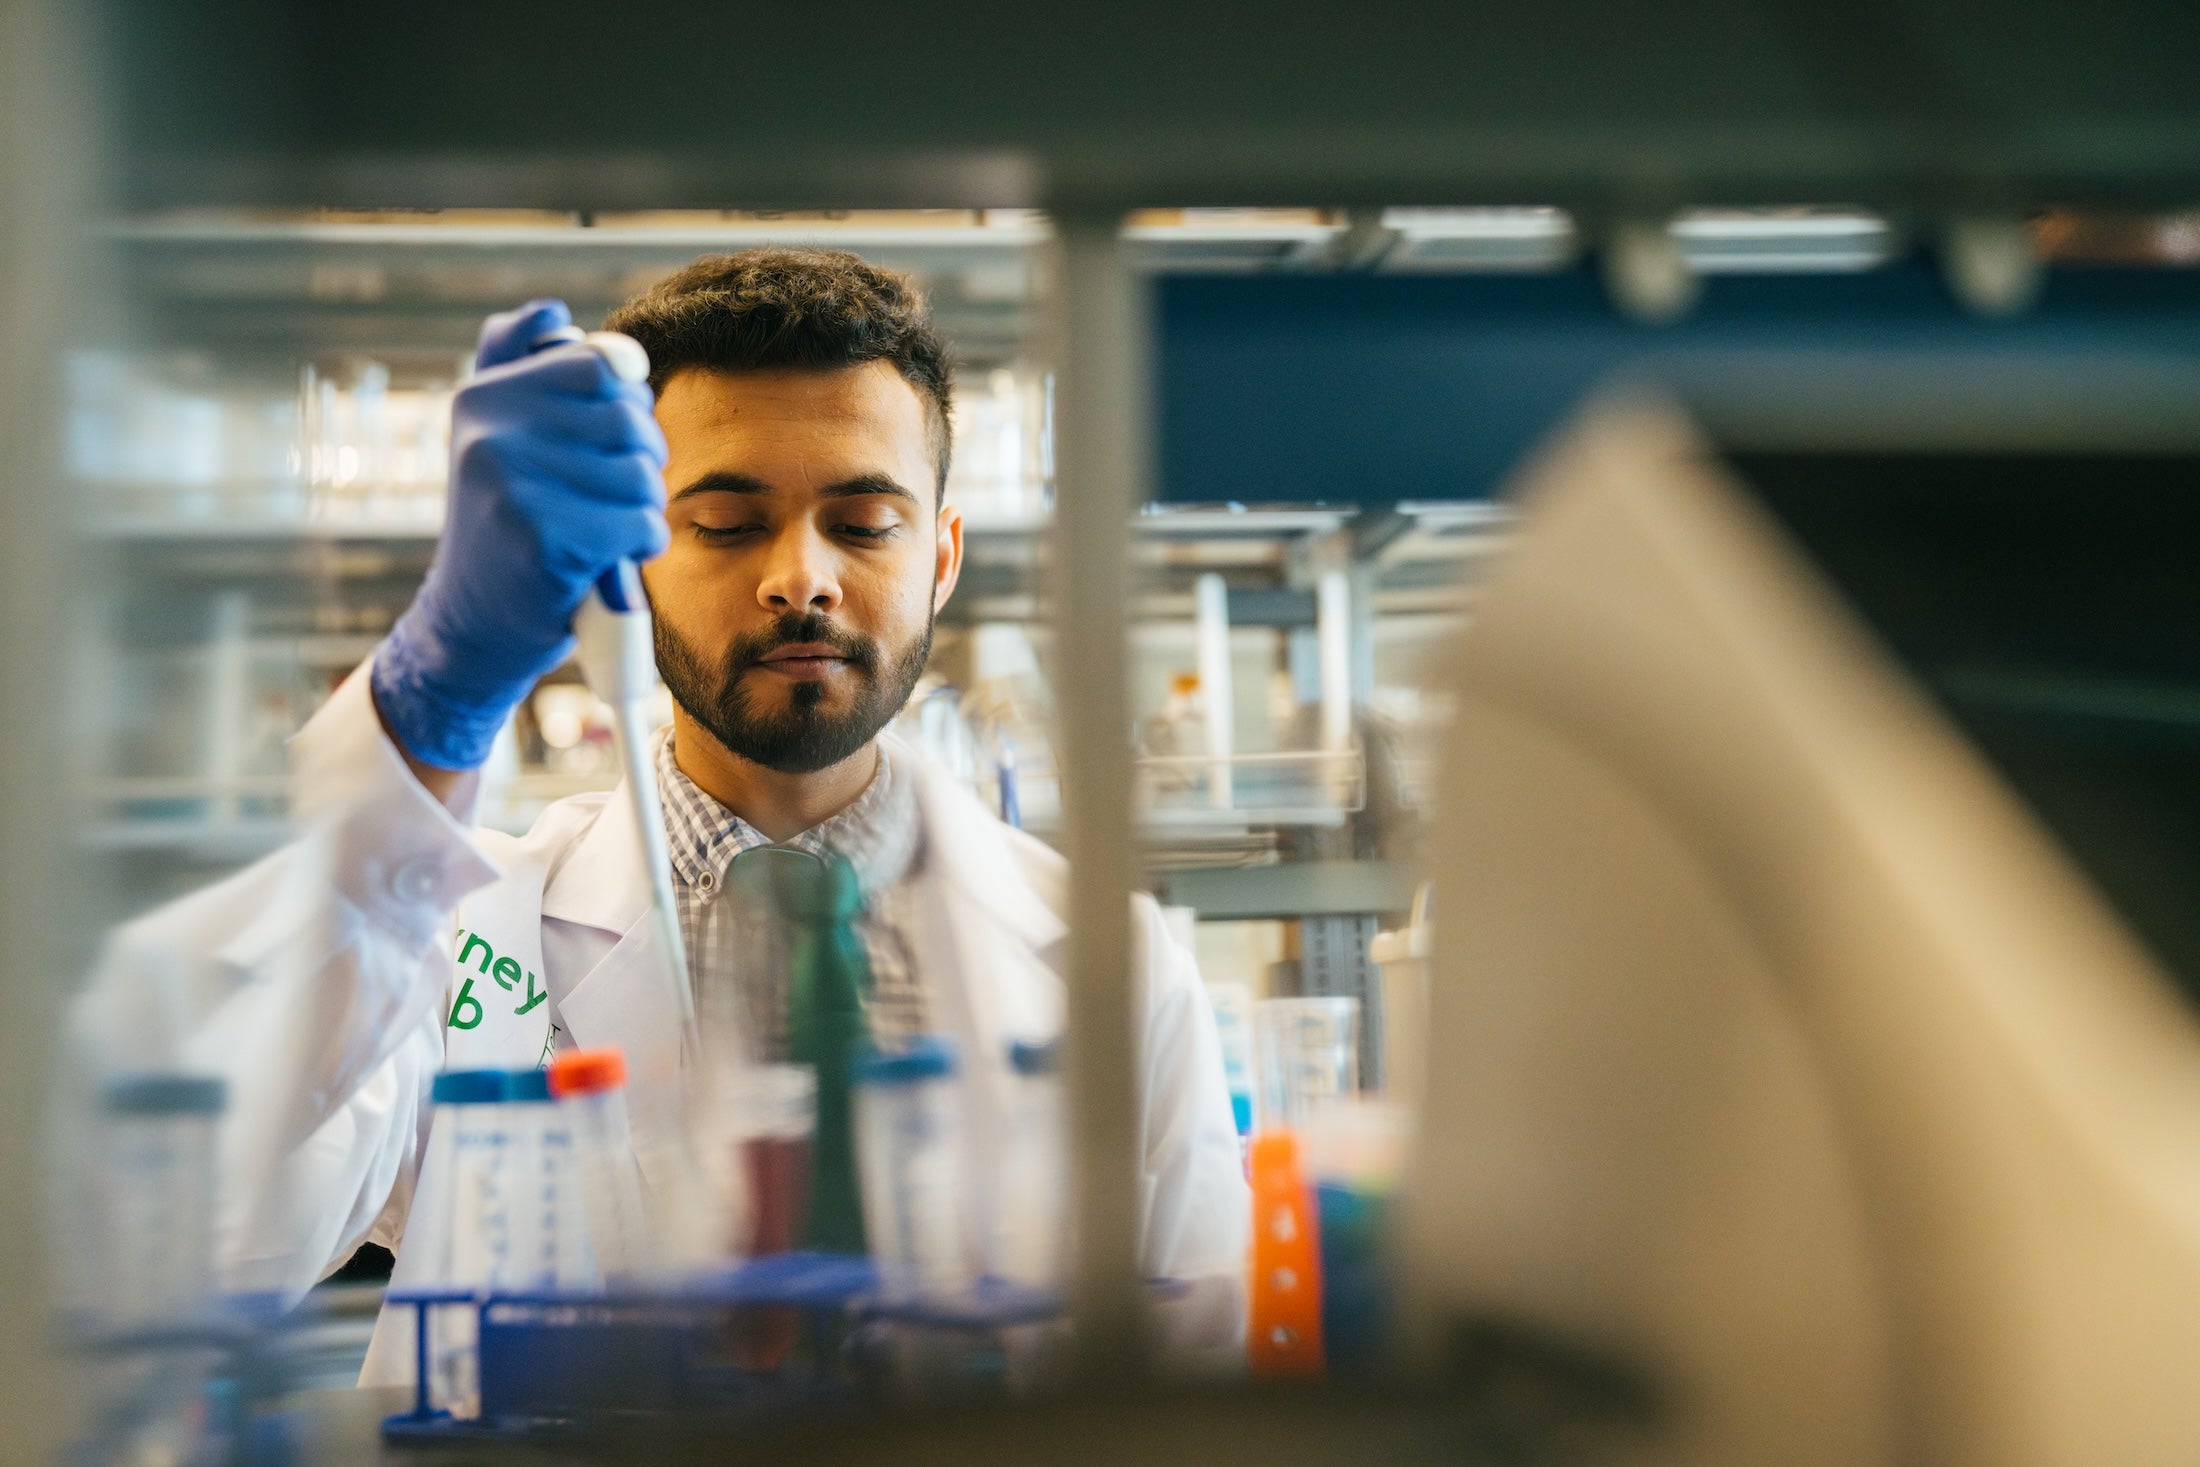 School of Pharmacy student working in a research lab